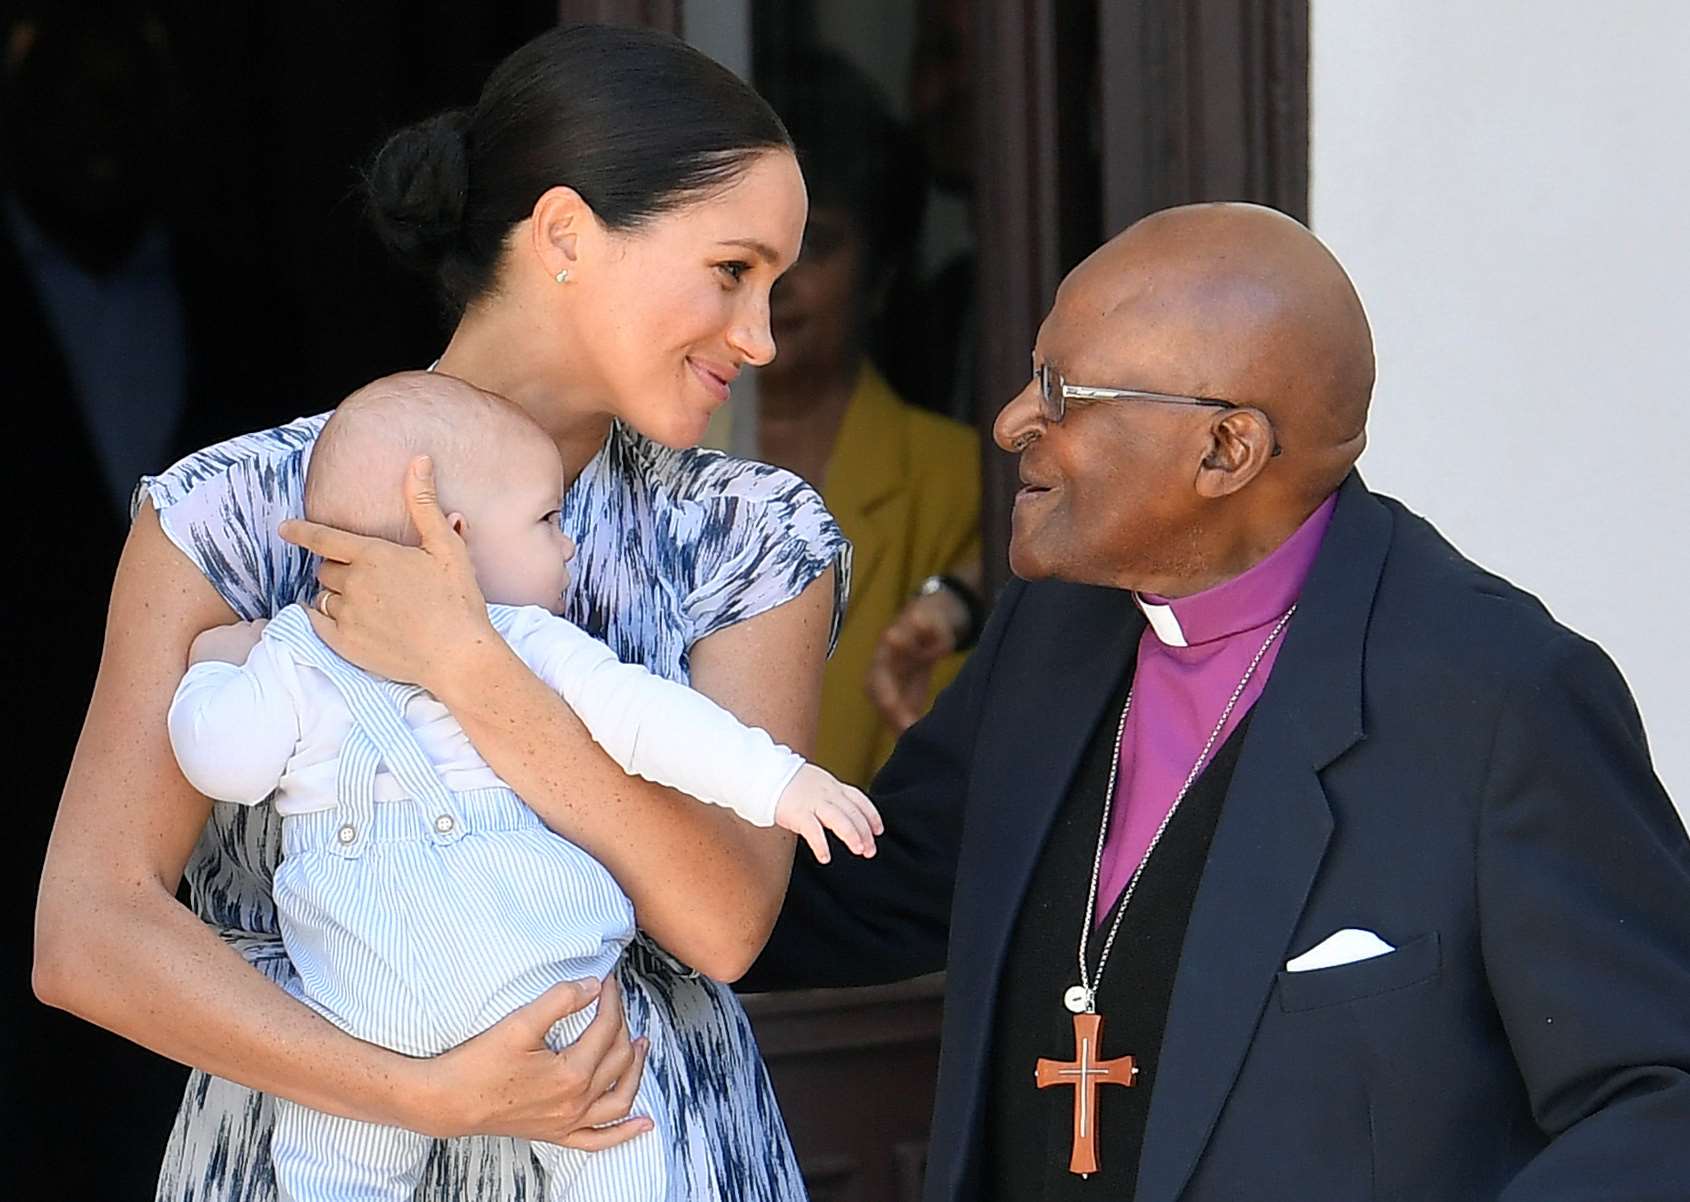 Archbishop Desmond Tutu presented Harry and Meghan’s son Archie with gifts during their visit to South Africa last year (Toby Melville/PA)